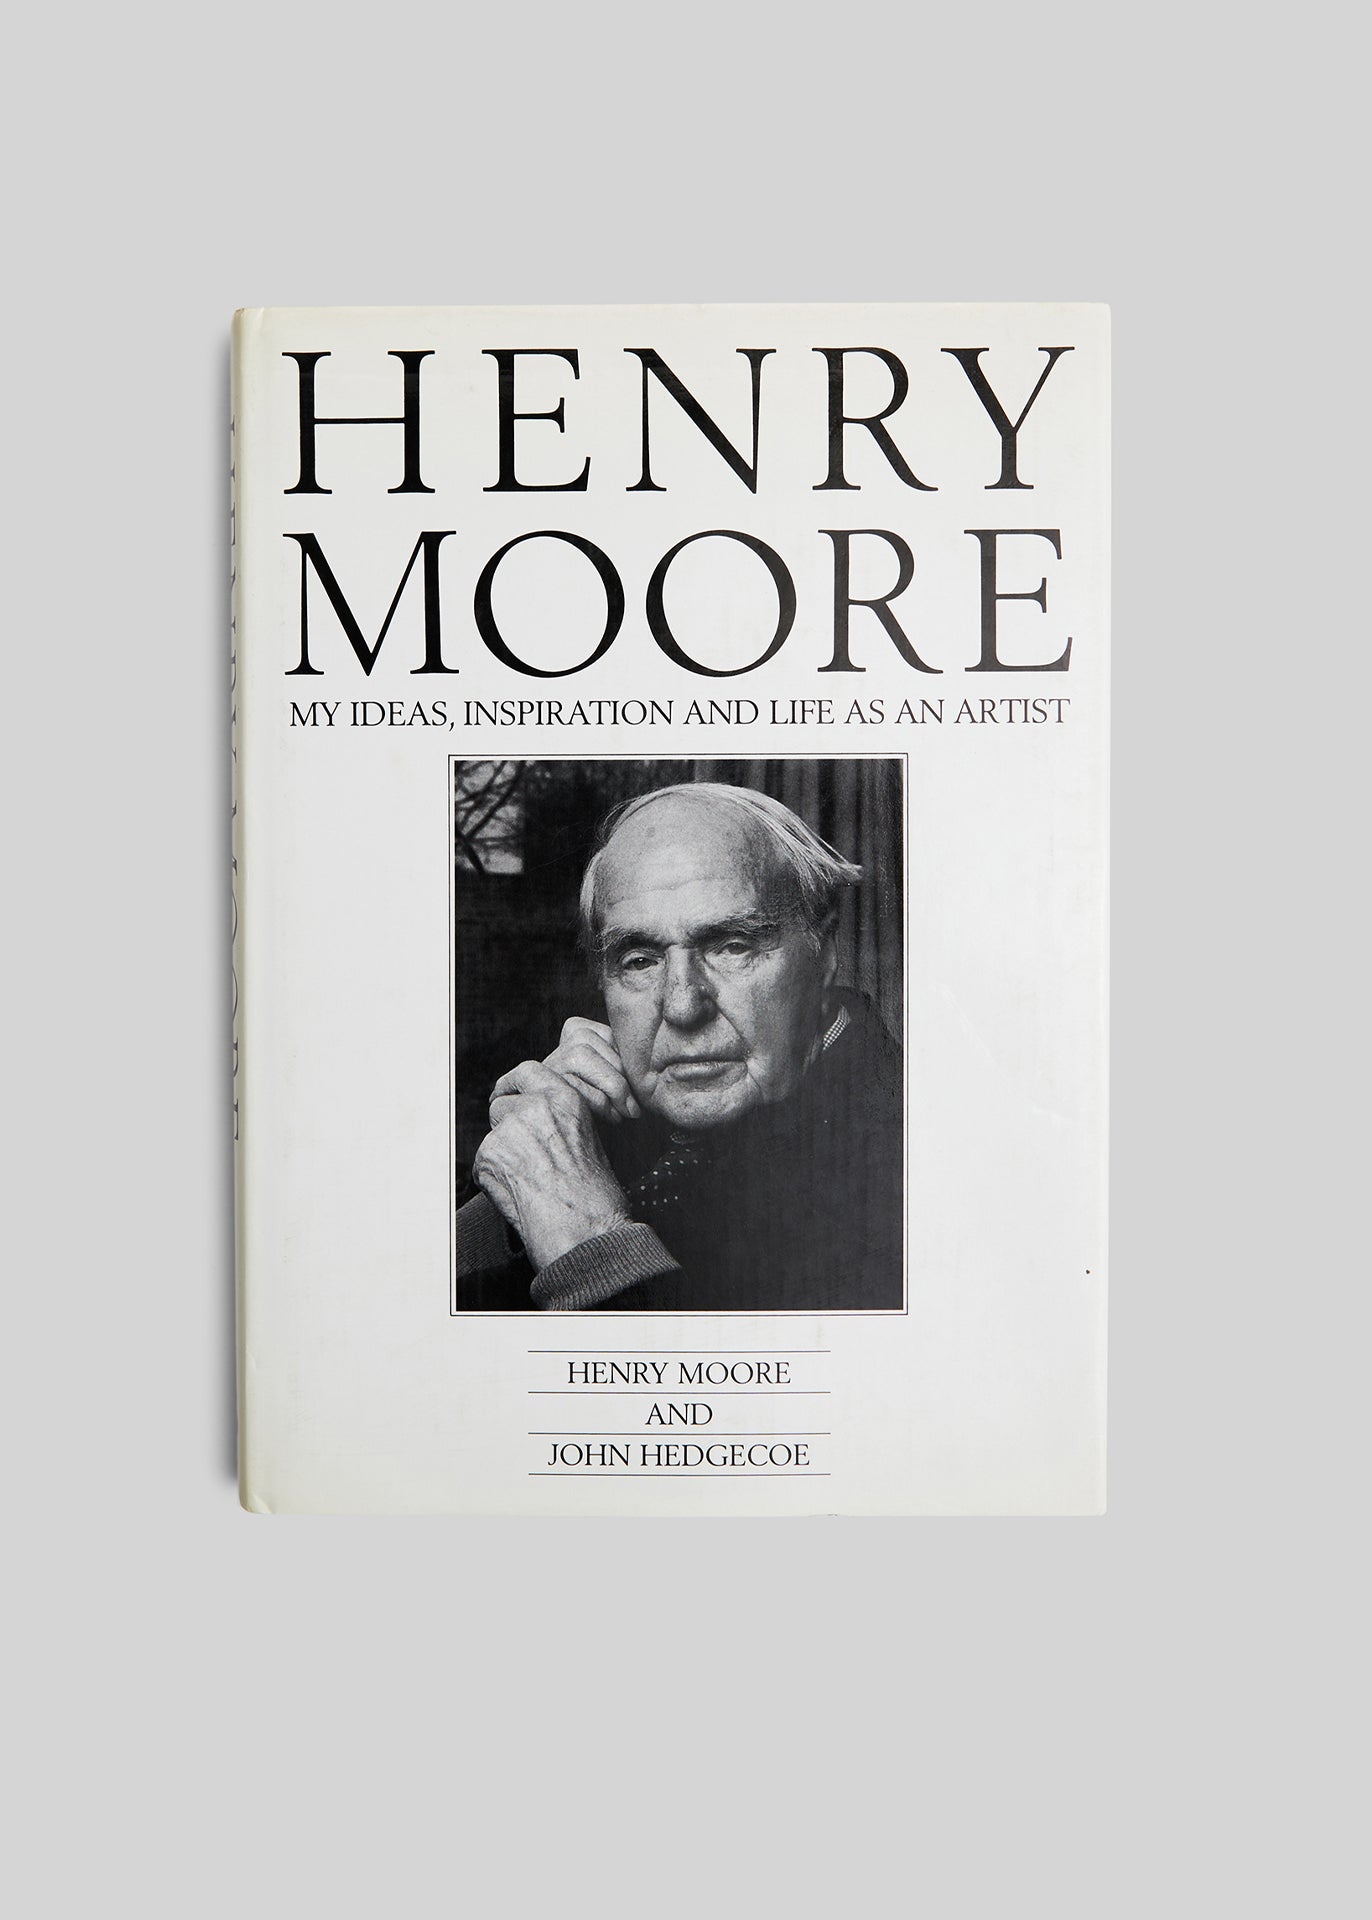 HENRY MOORE: MY IDEAS, INSPIRATION AND LIFE AS AN ARTIST